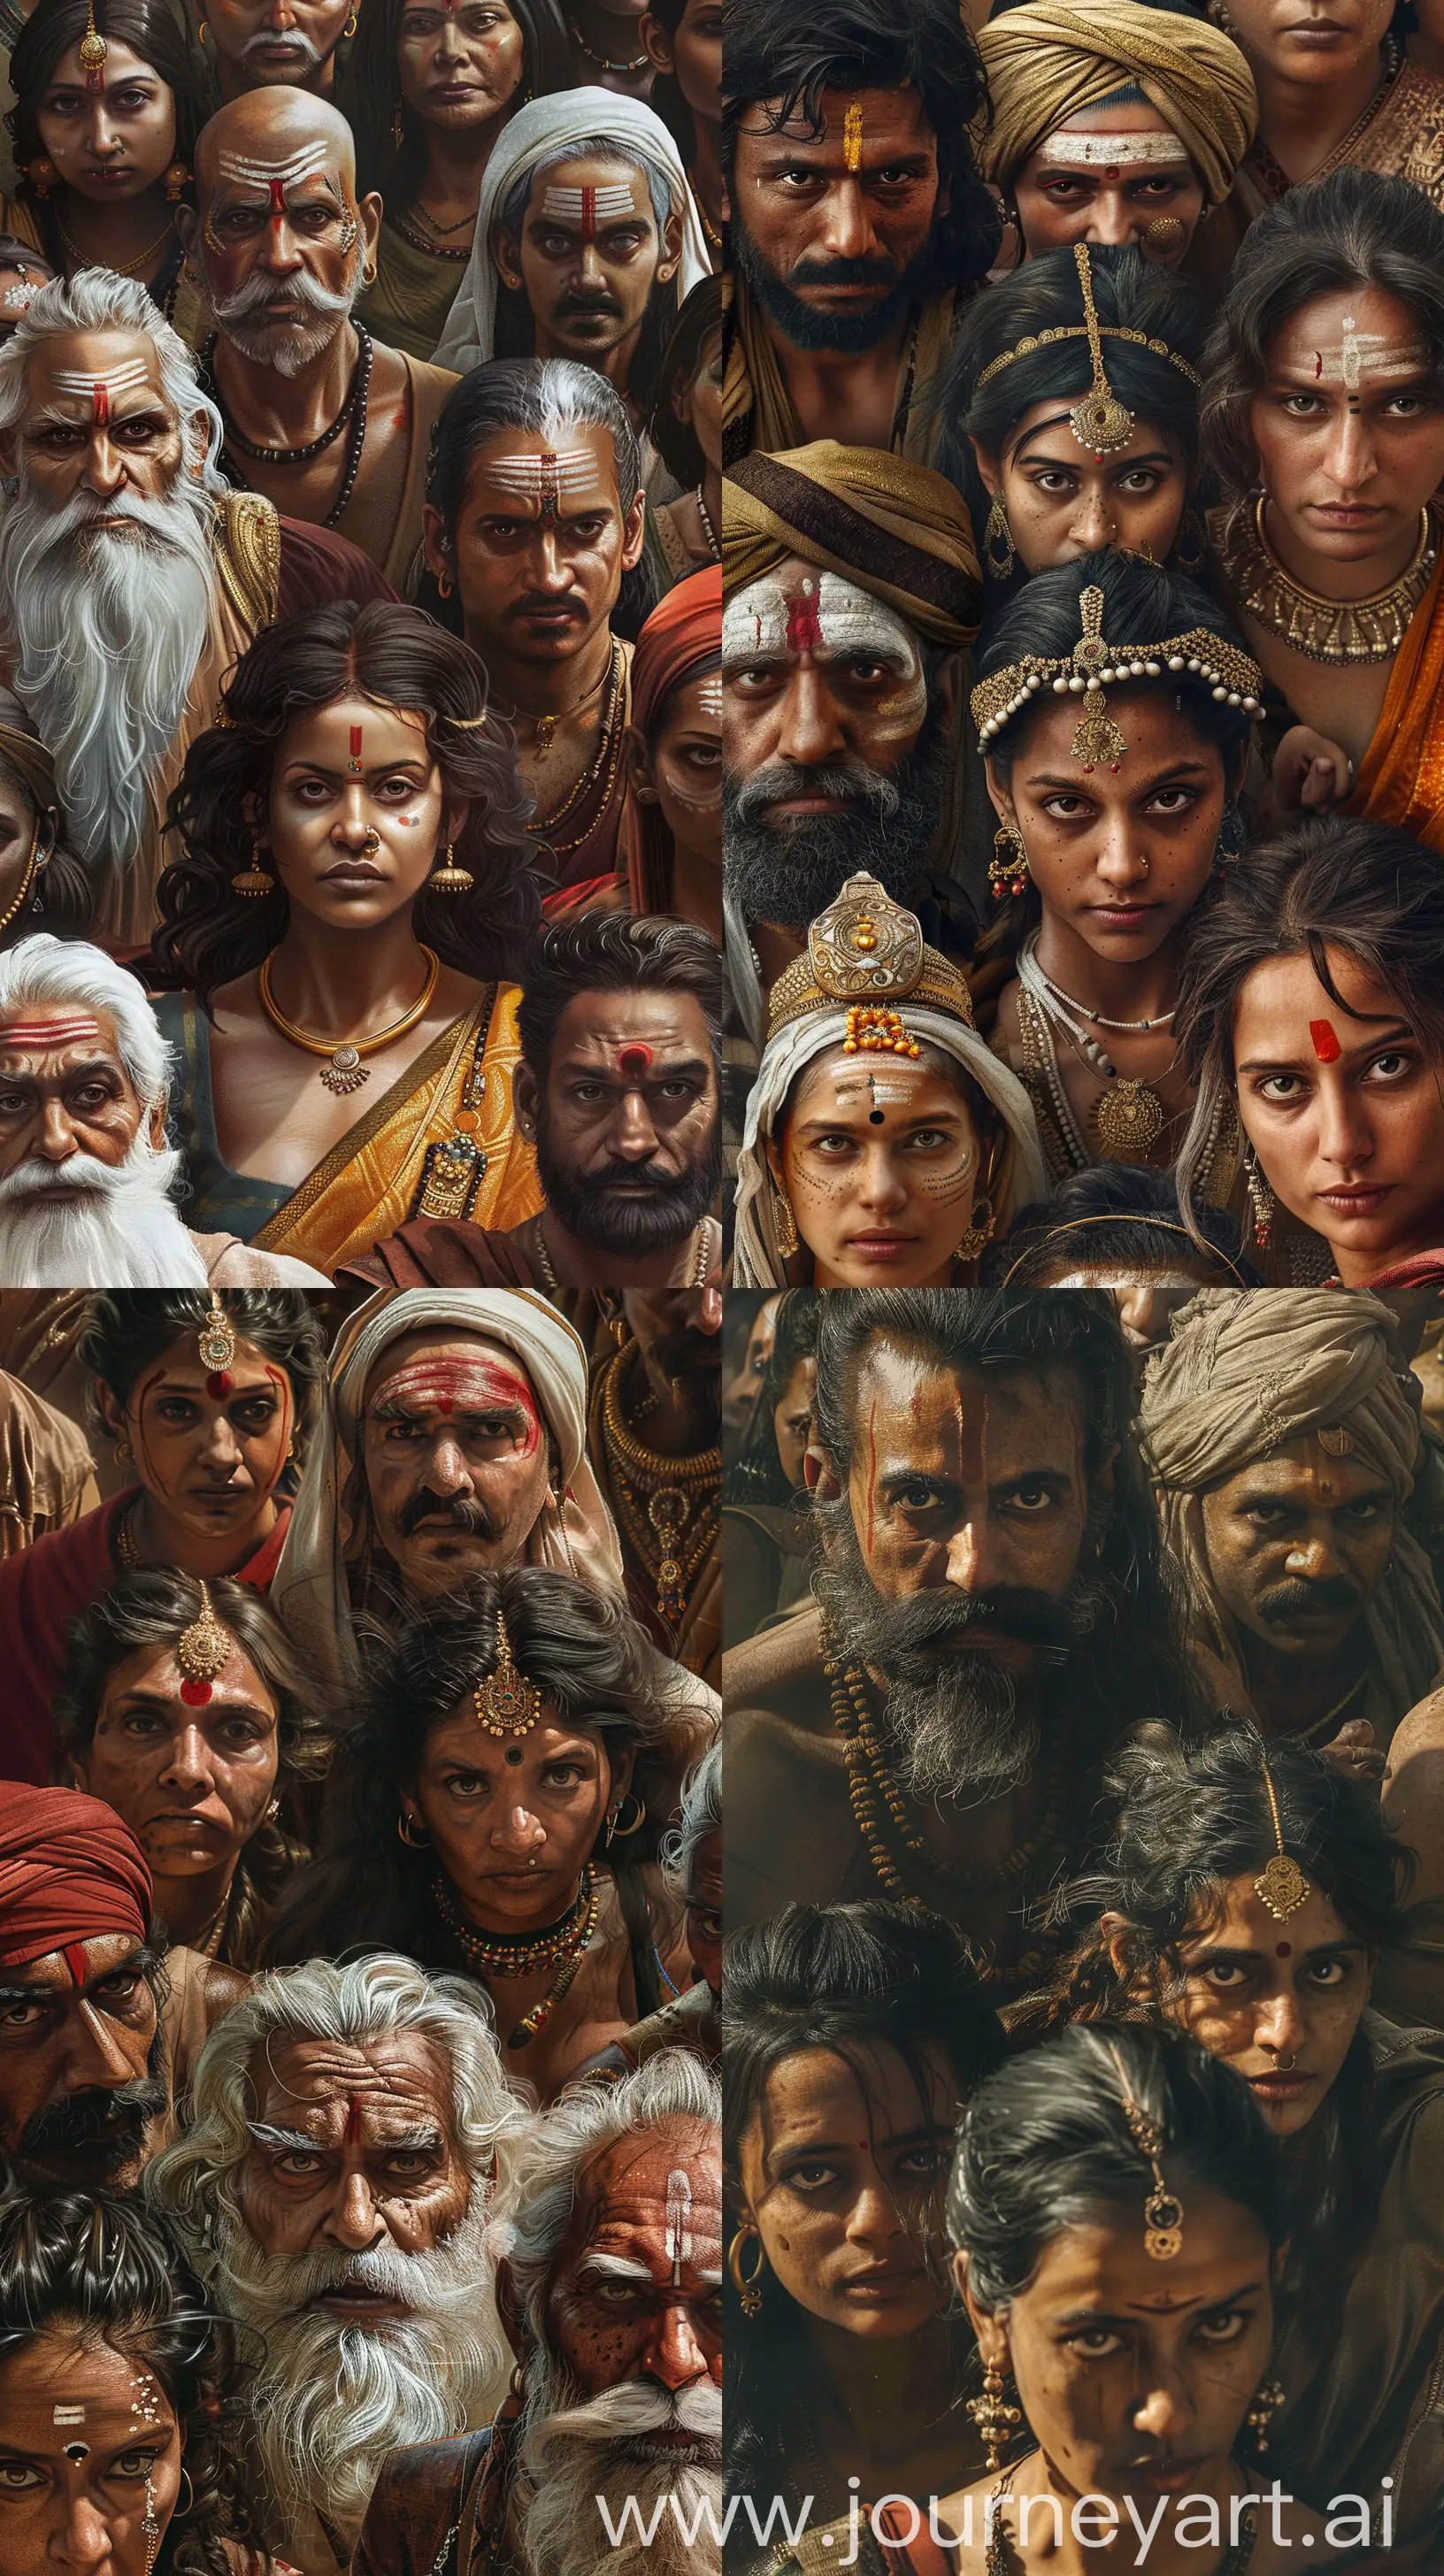 Group of Indian people from ancient times, curious looks on their faces, intricate details, 8k quality images --ar 9:16